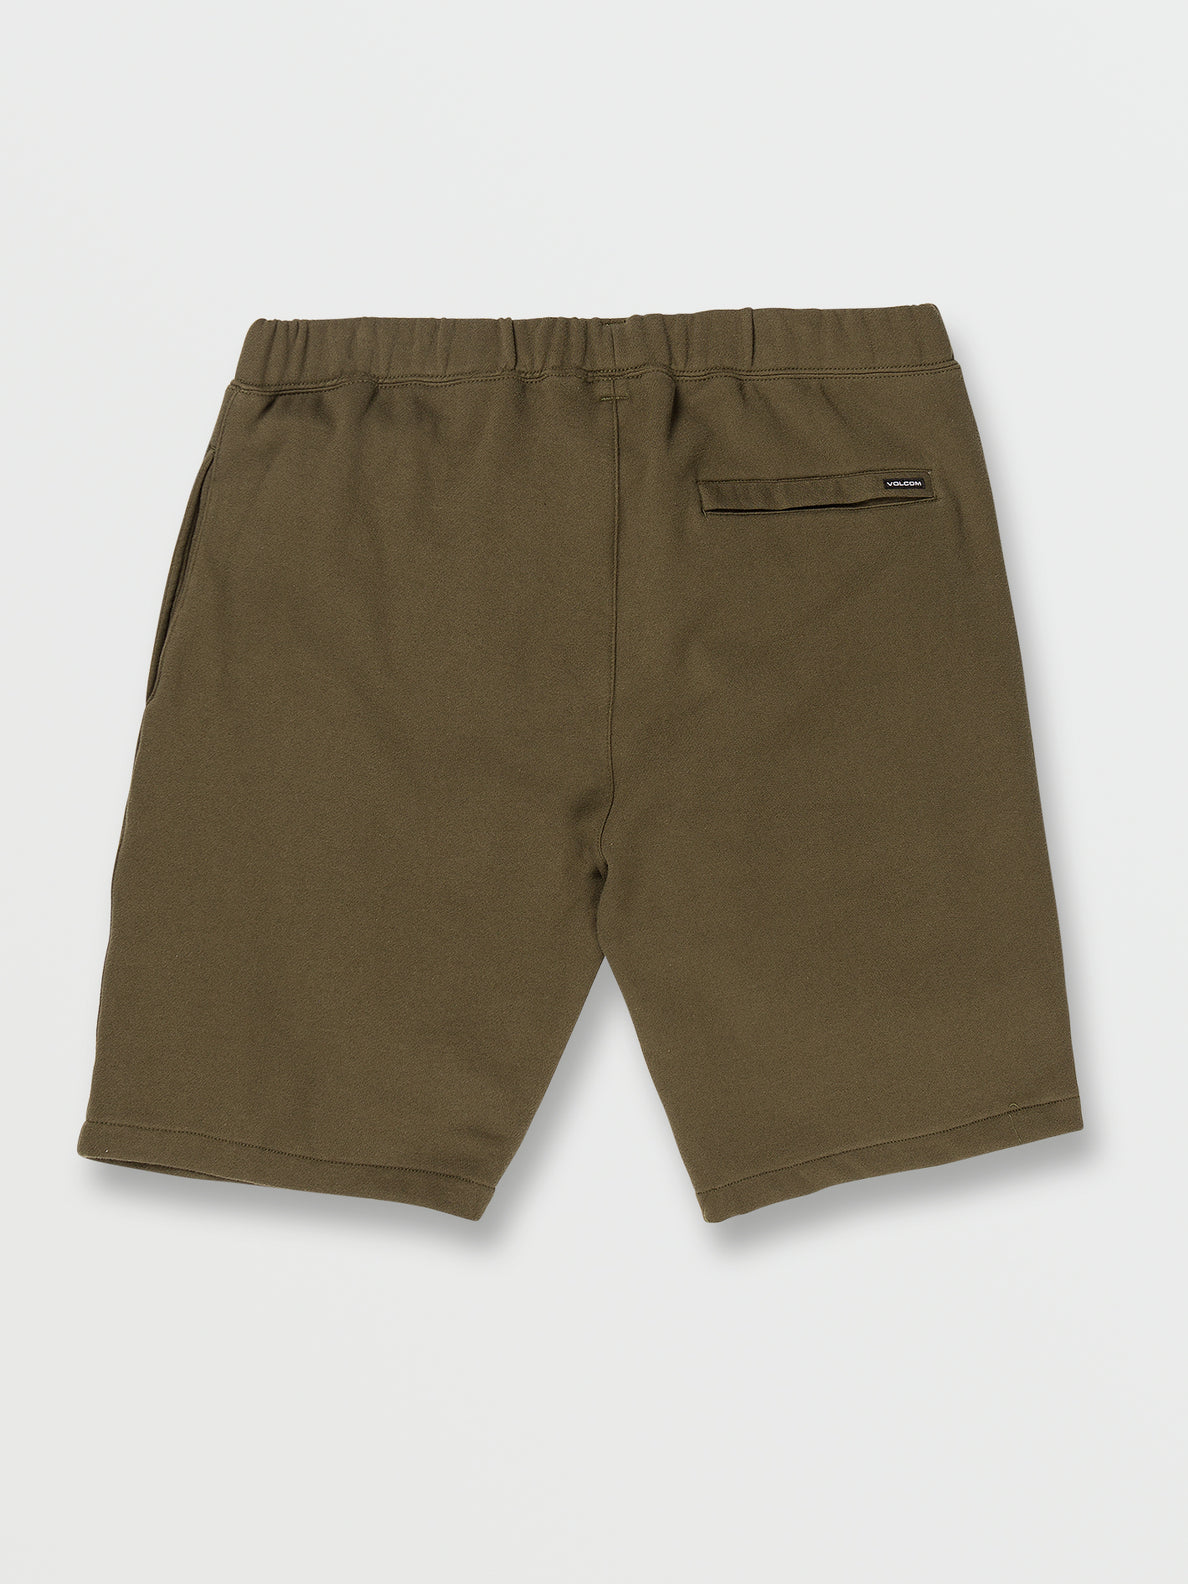 Iconic Stone Fleece Shorts - Military (A1032102_MIL) [B]